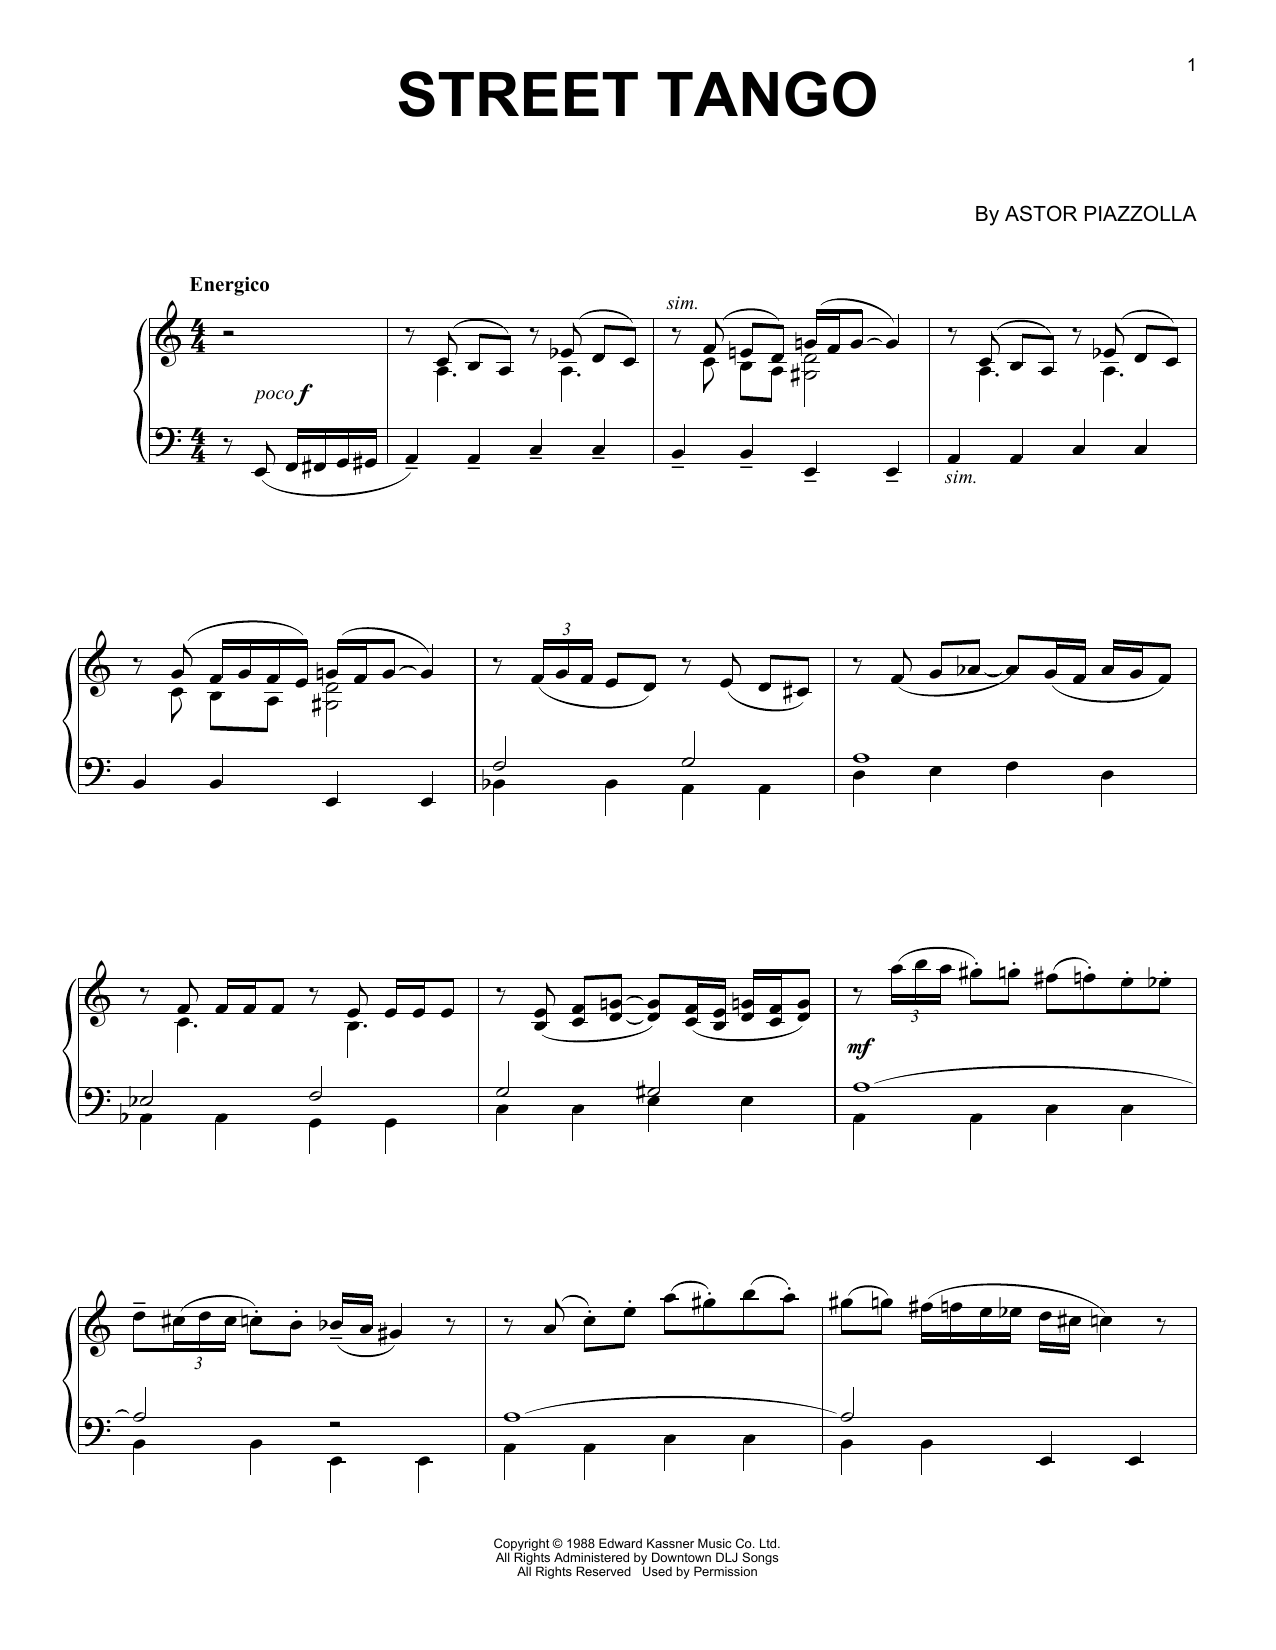 Astor Piazzolla Street Tango sheet music notes and chords. Download Printable PDF.